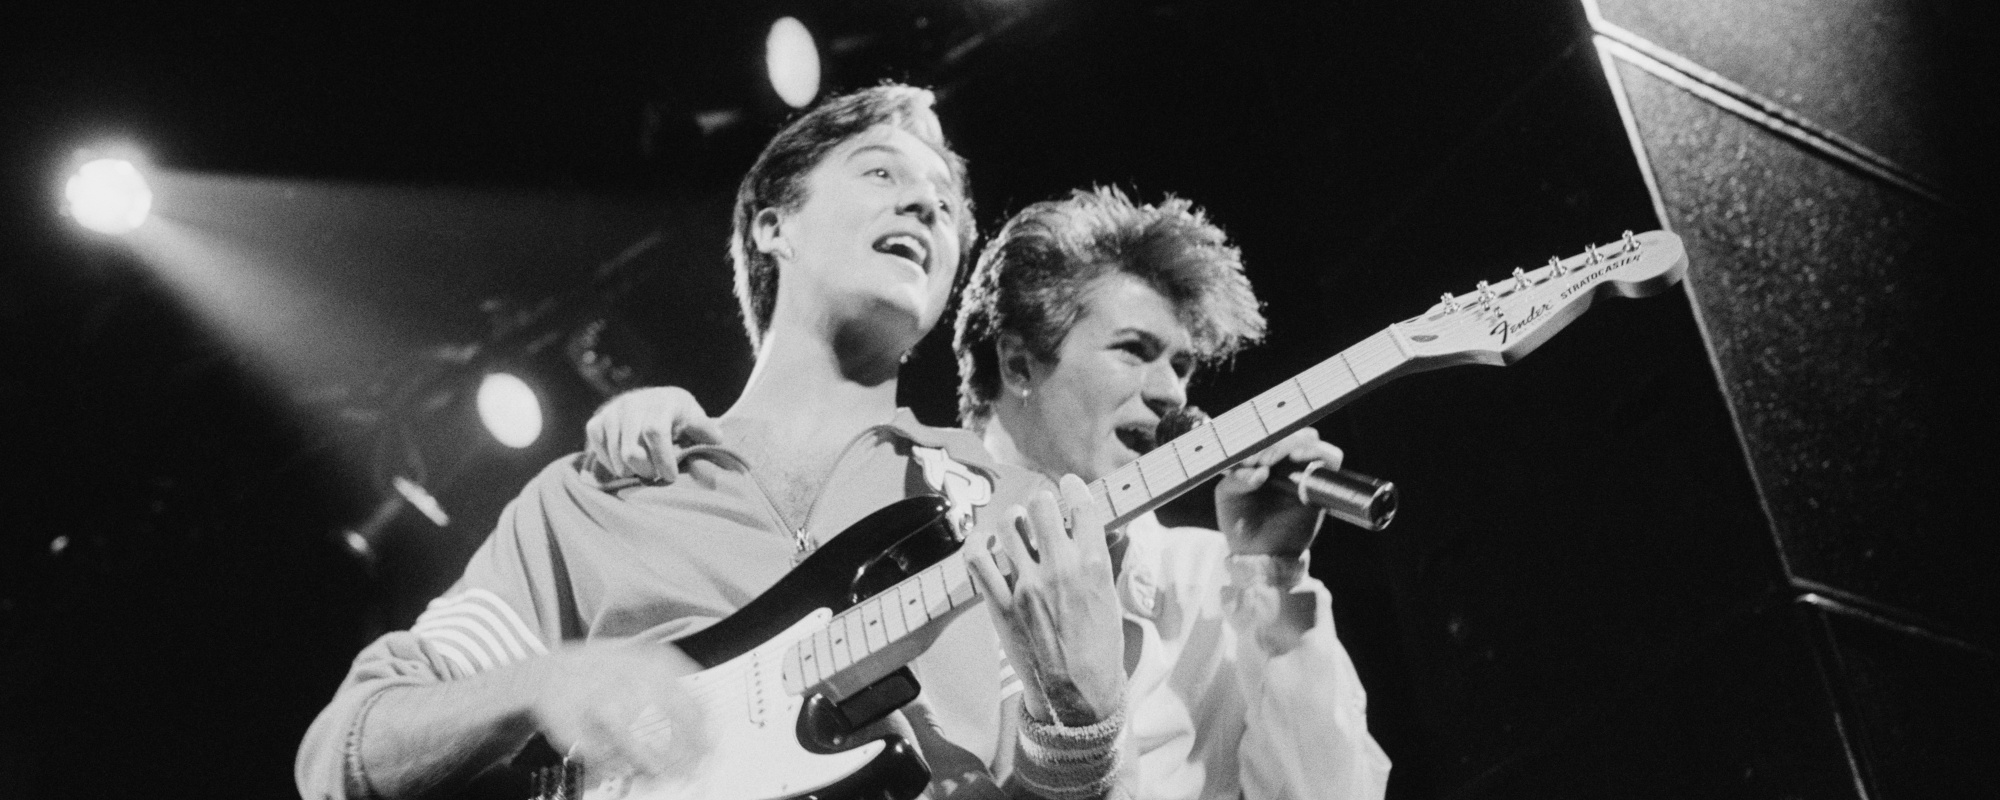 The Story and Meaning Behind “Everything She Wants” by Wham! and How It Served as a Springboard for George Michael’s Solo Career